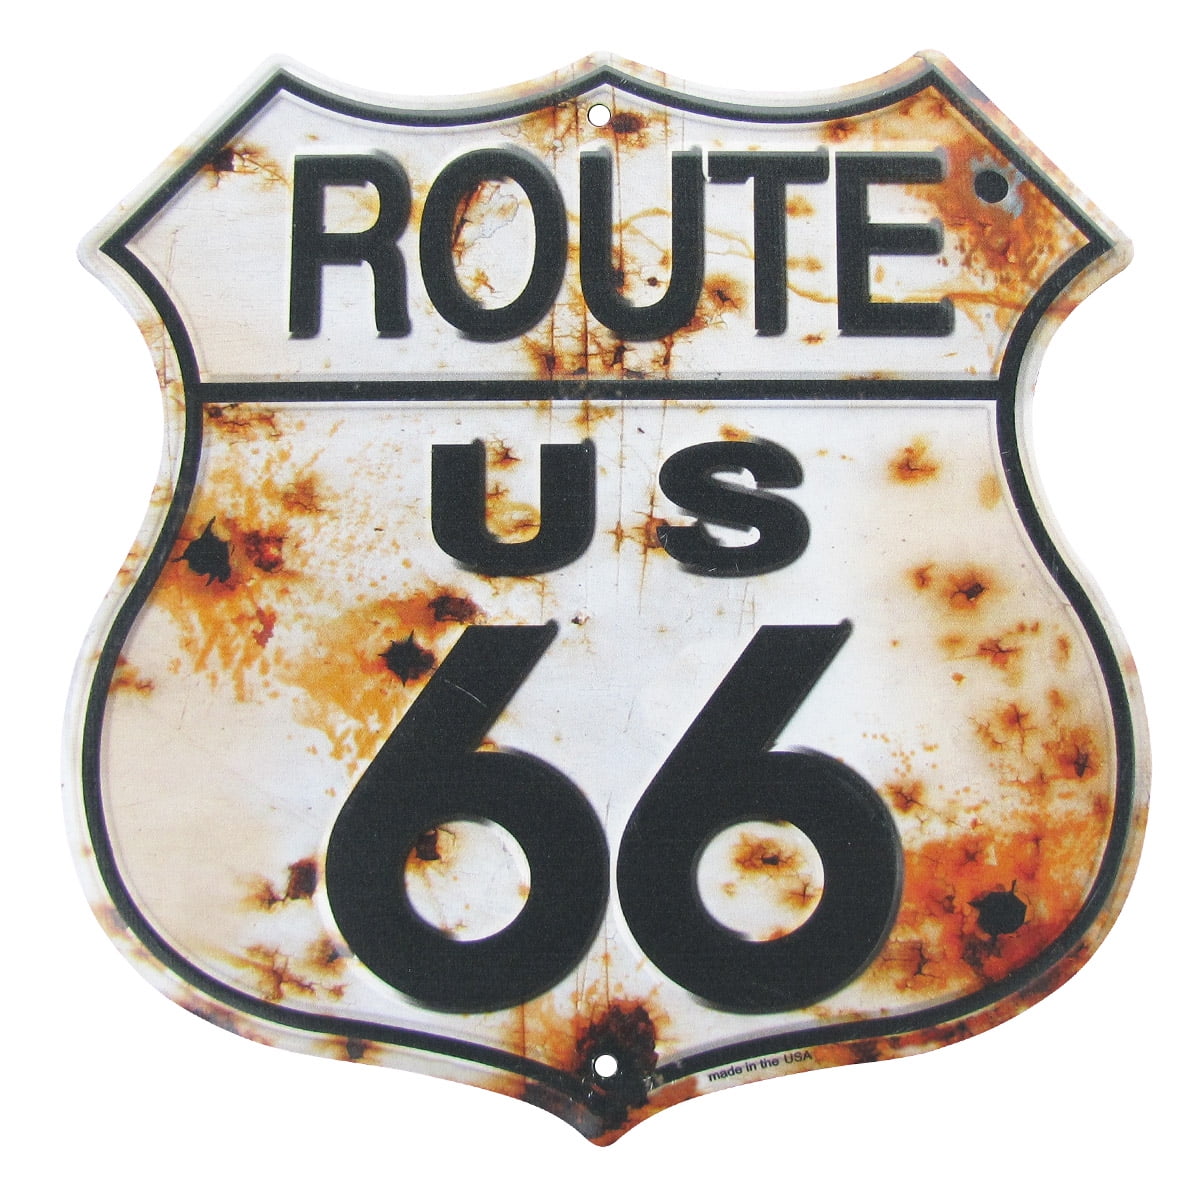 Mother Road Decorative Novelty License Plate Tin Metal Sign Route 66 USA